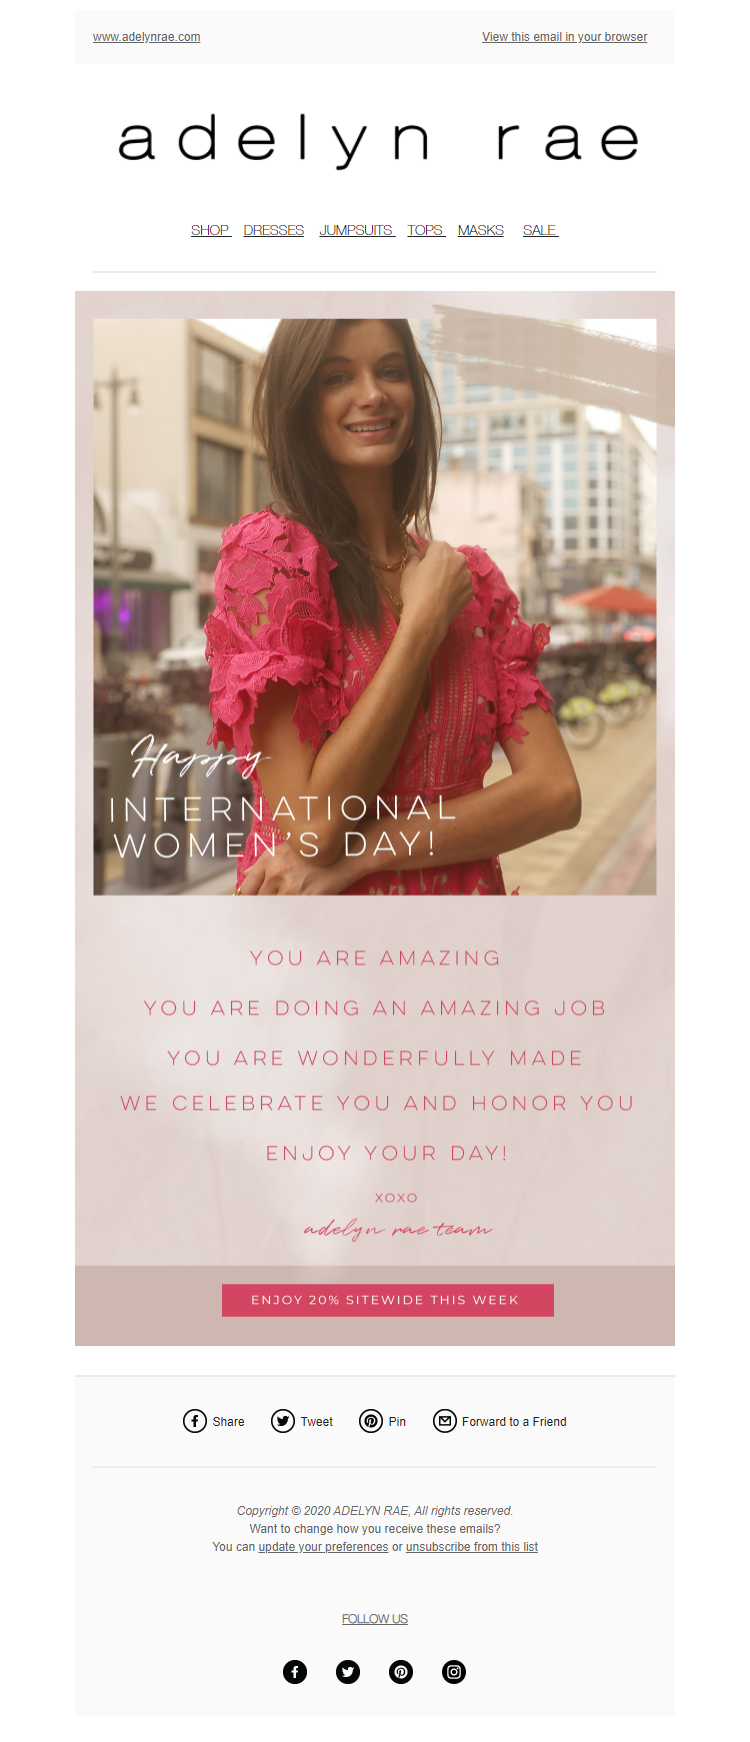 Adelyn Rae- Women's day email Inspiration